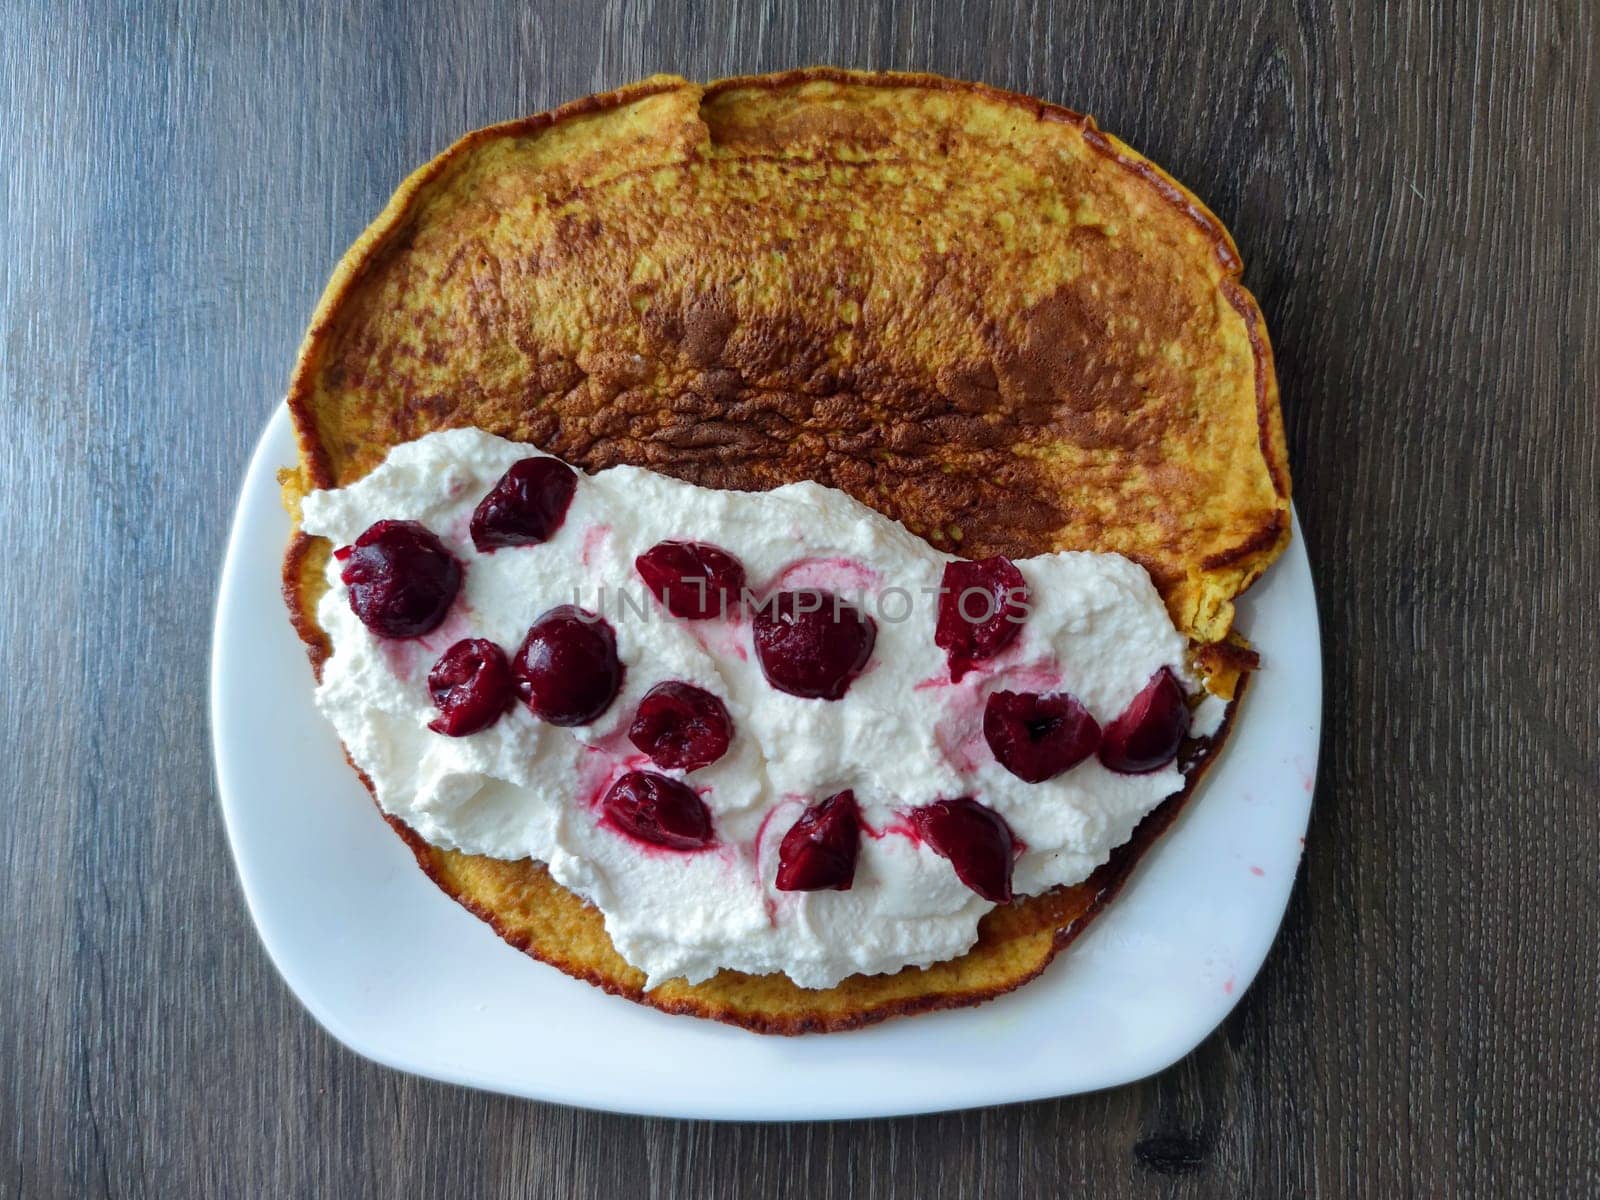 oat pancake with cottage cheese and cherries on a white plate by Annado